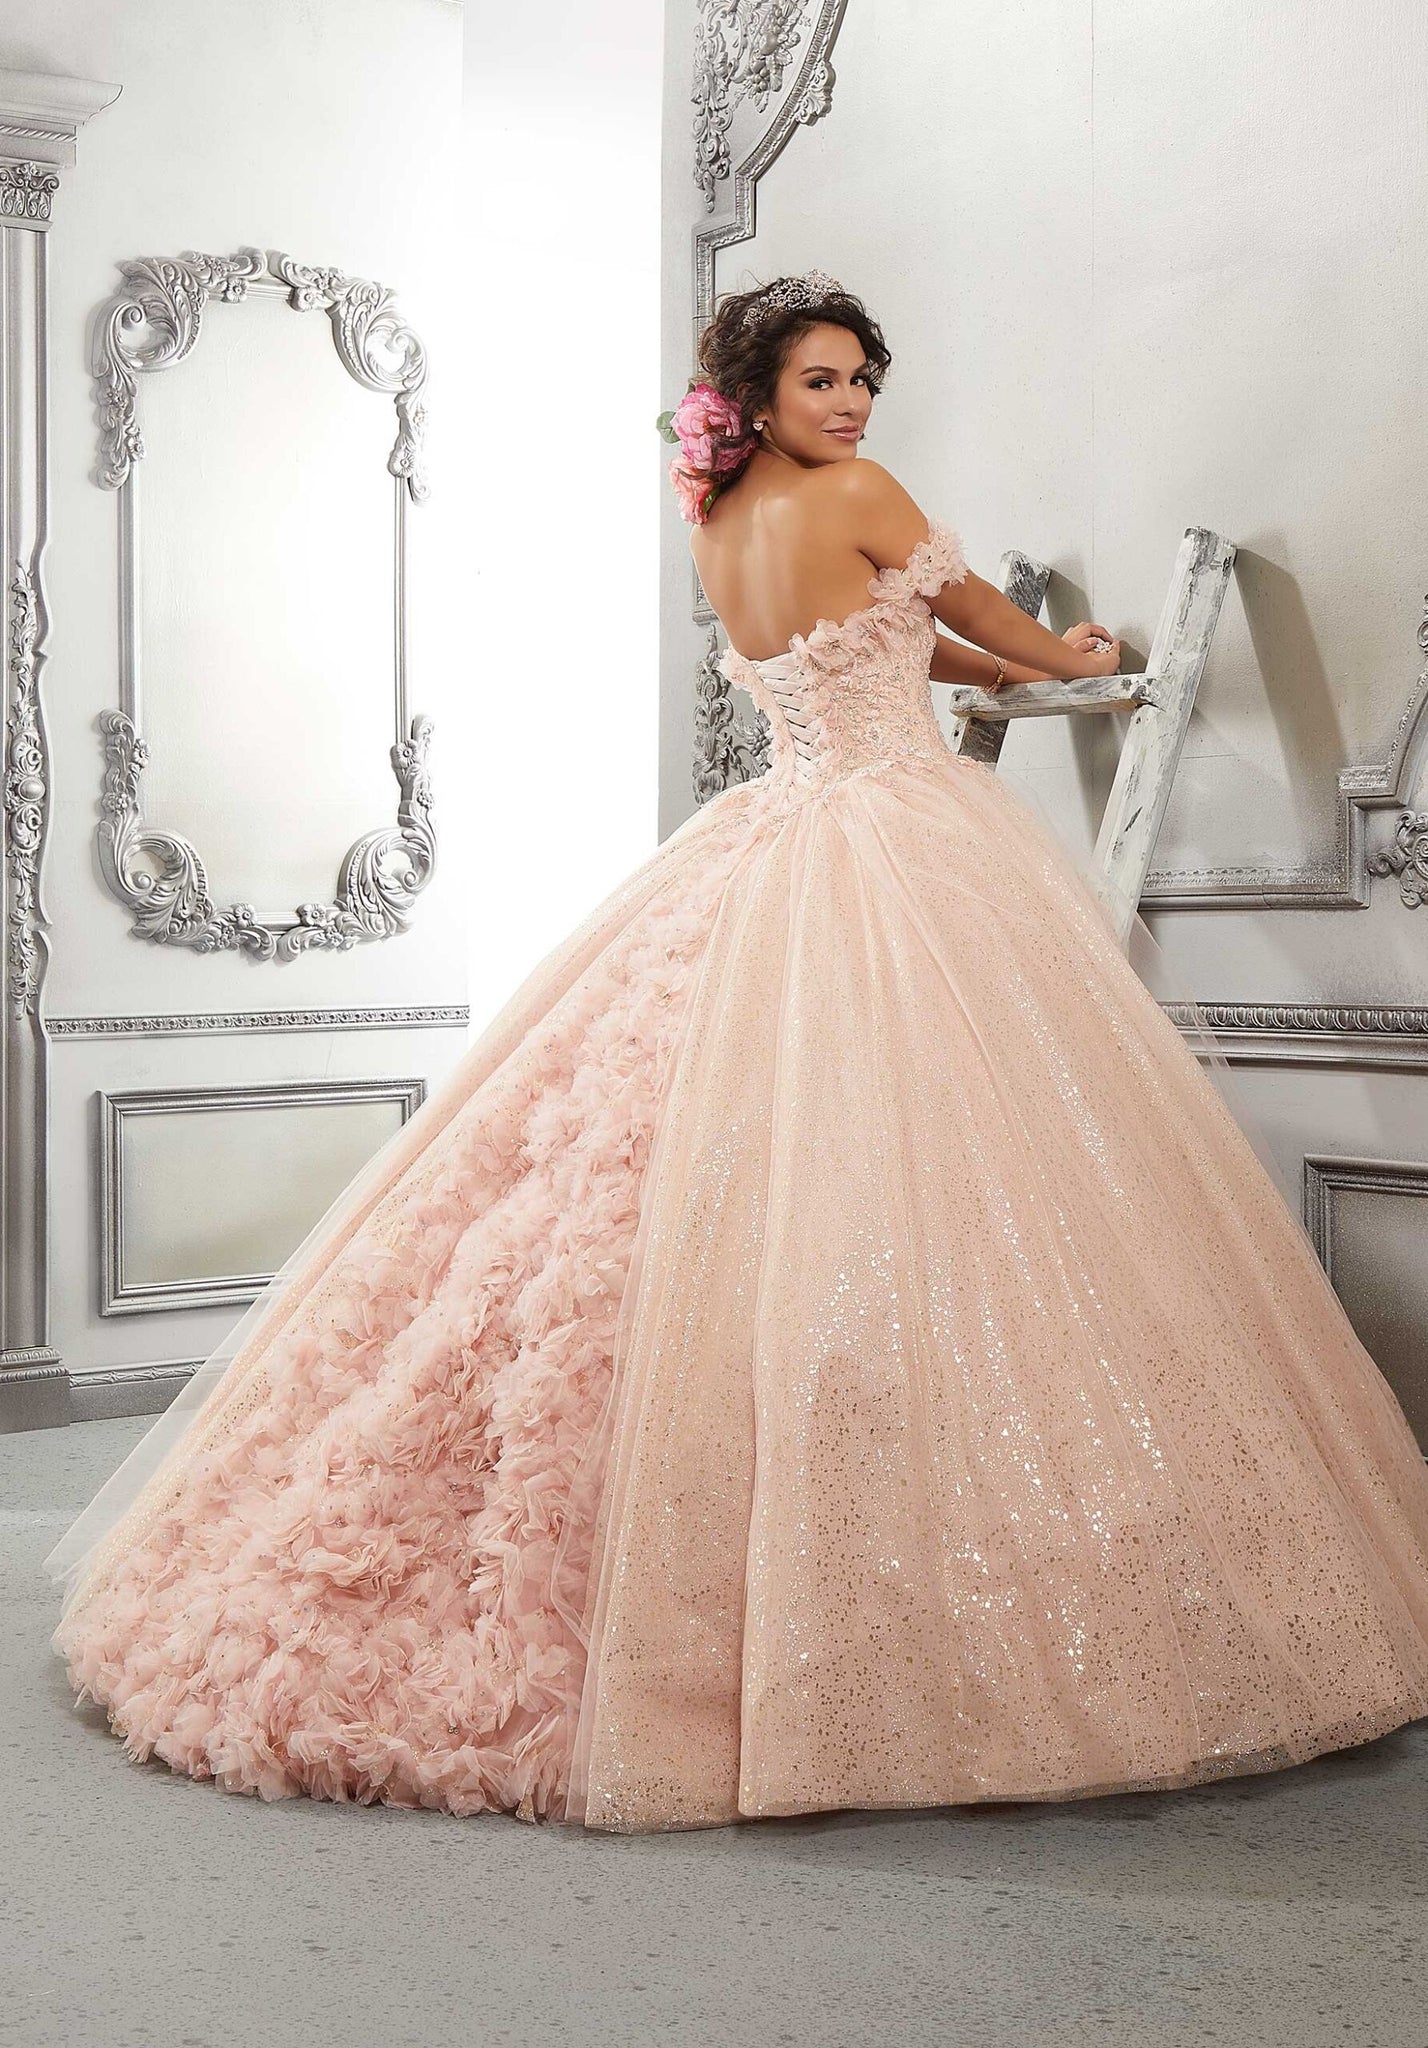 Three-Dimensional Floral Applique and Metallic Embroidered Quinceañera Dress